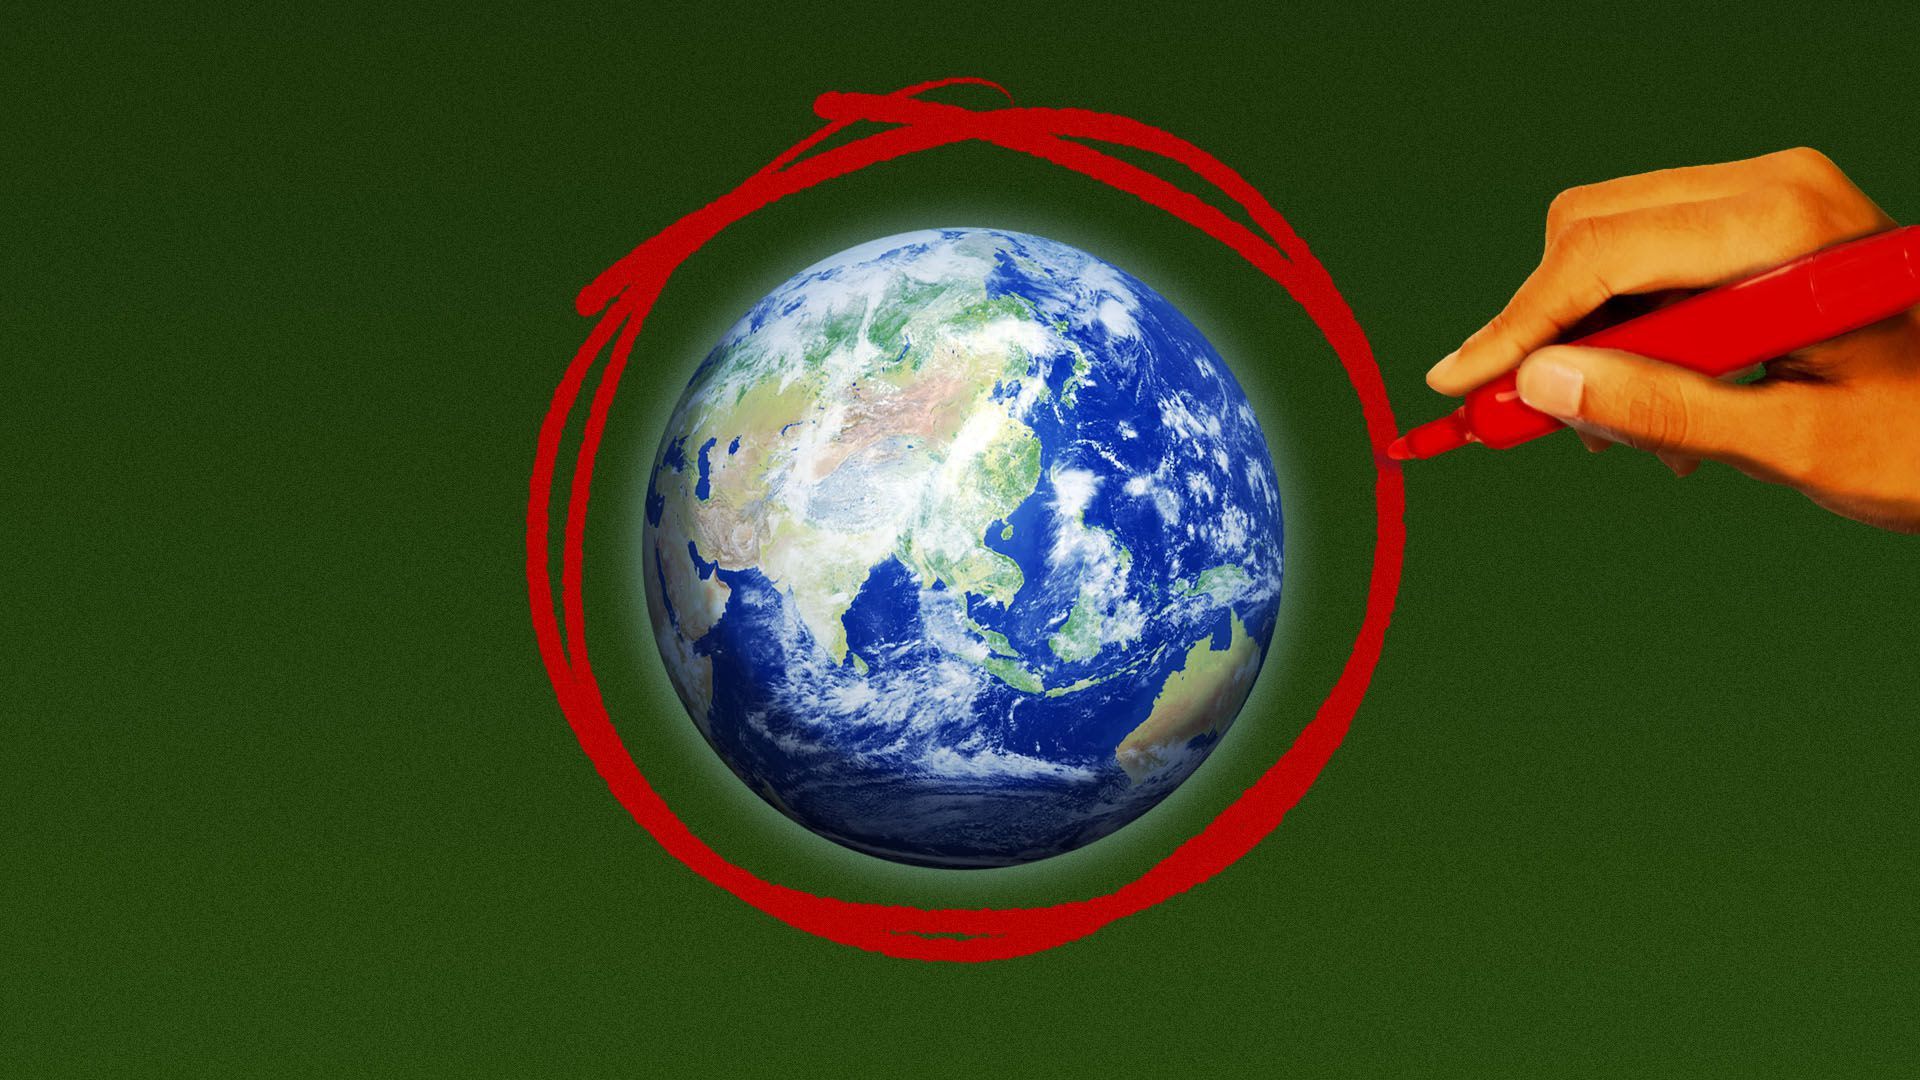 Illustration of a globe with a red circle around it.